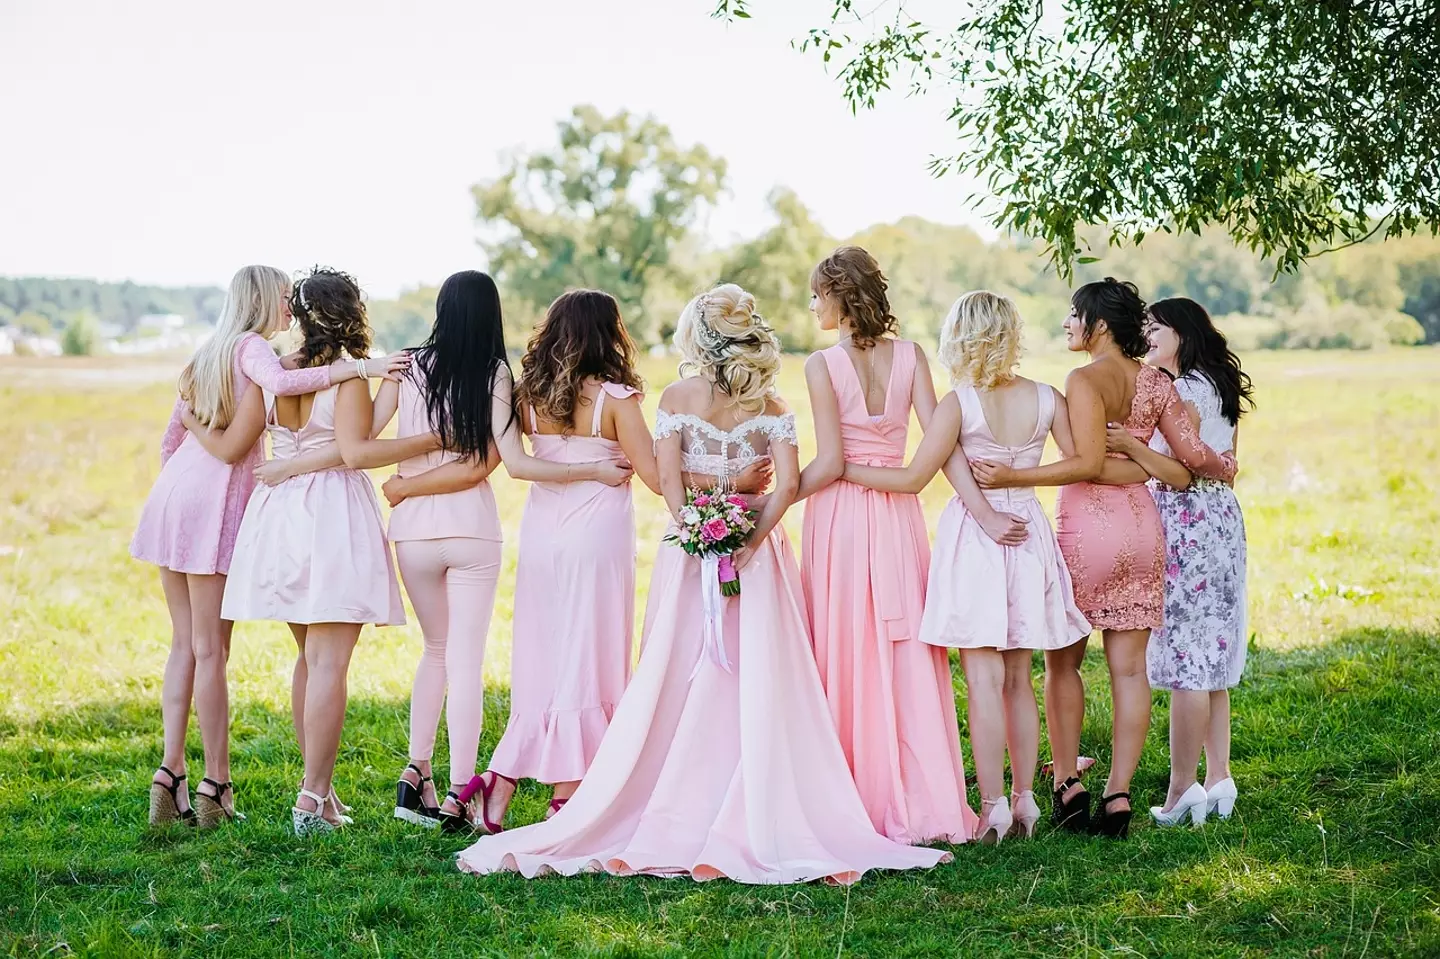 Initially, Grace was surprised that she was even invited let alone asked to be a bridesmaid.